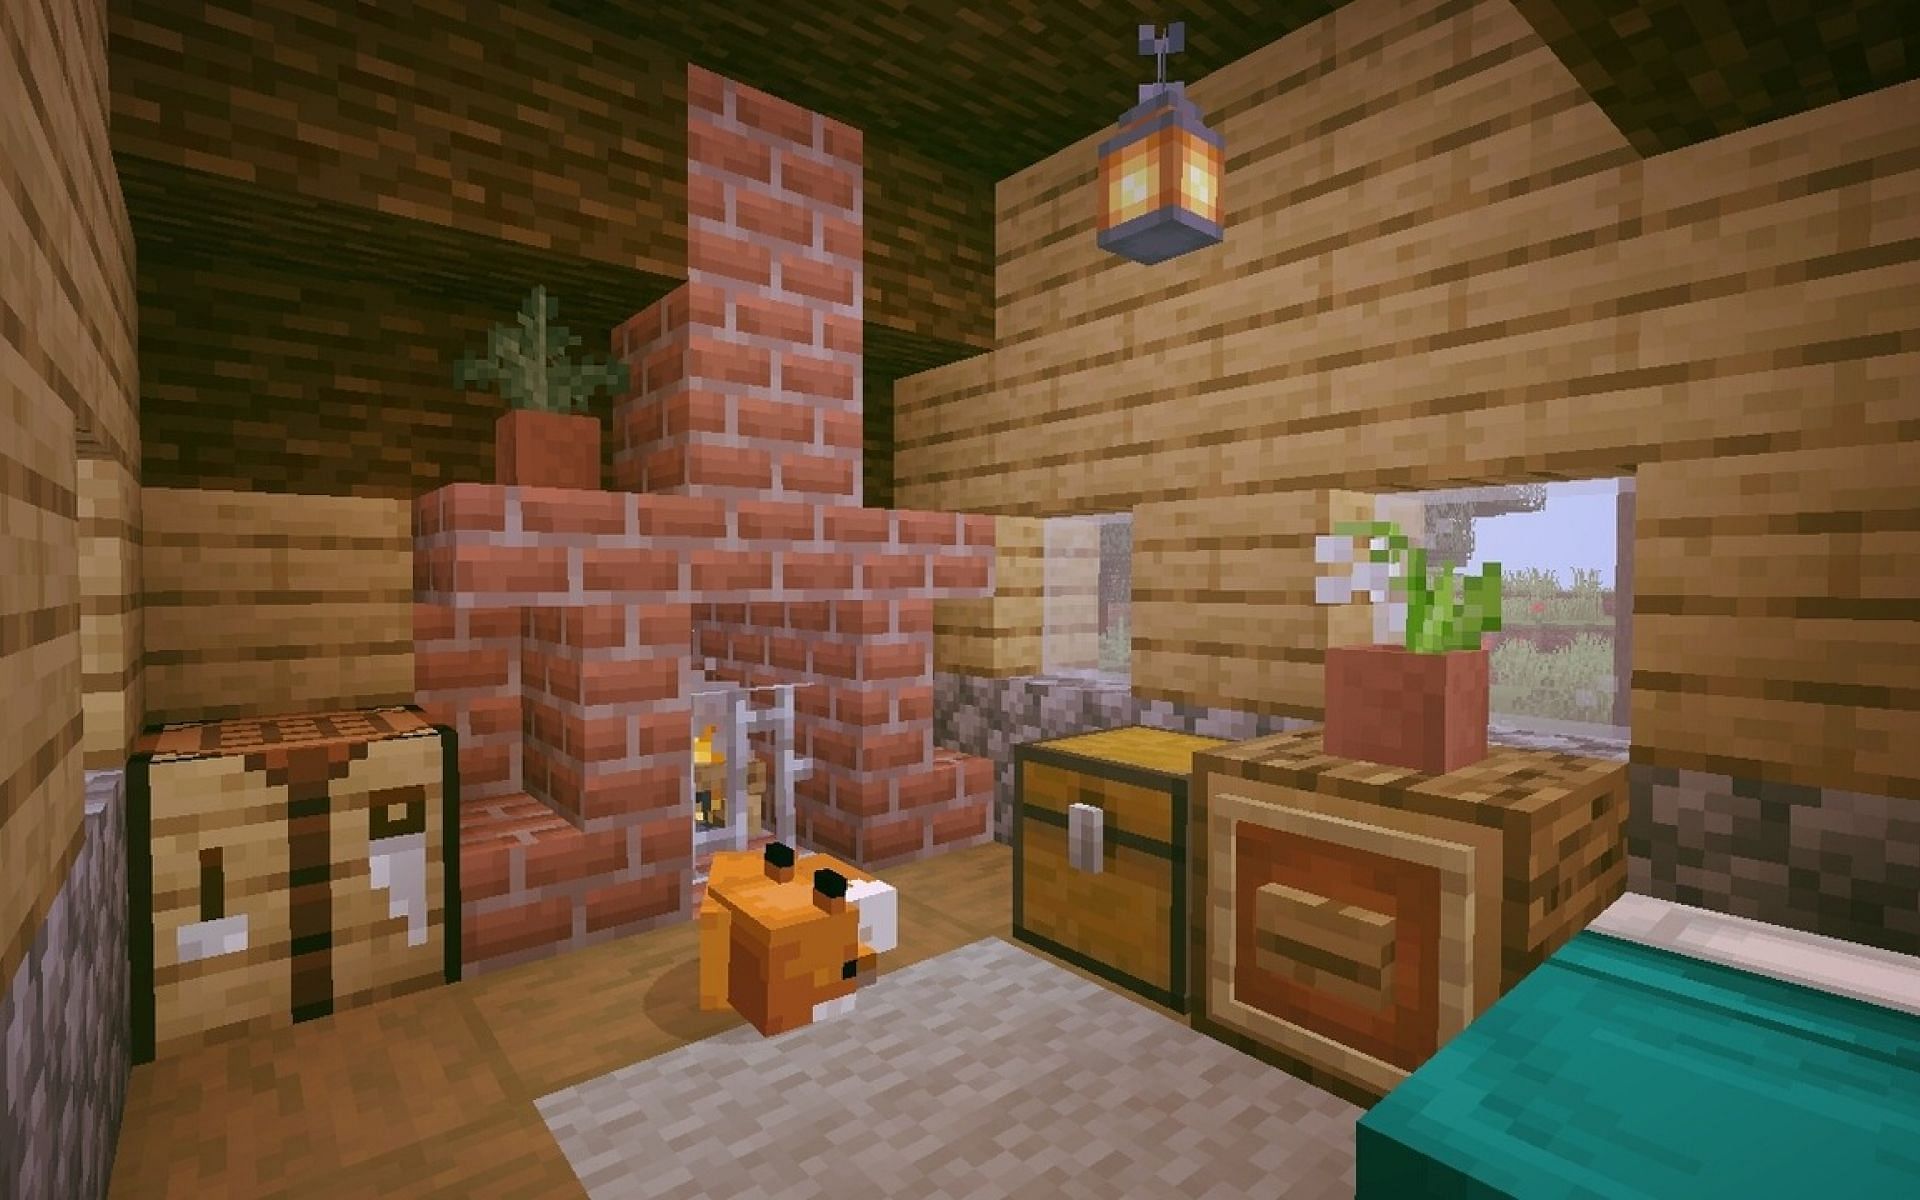 The interior of a Minecraft player&#039;s house in-game. Image via Mojang/ foxbewwies on Tumblr)